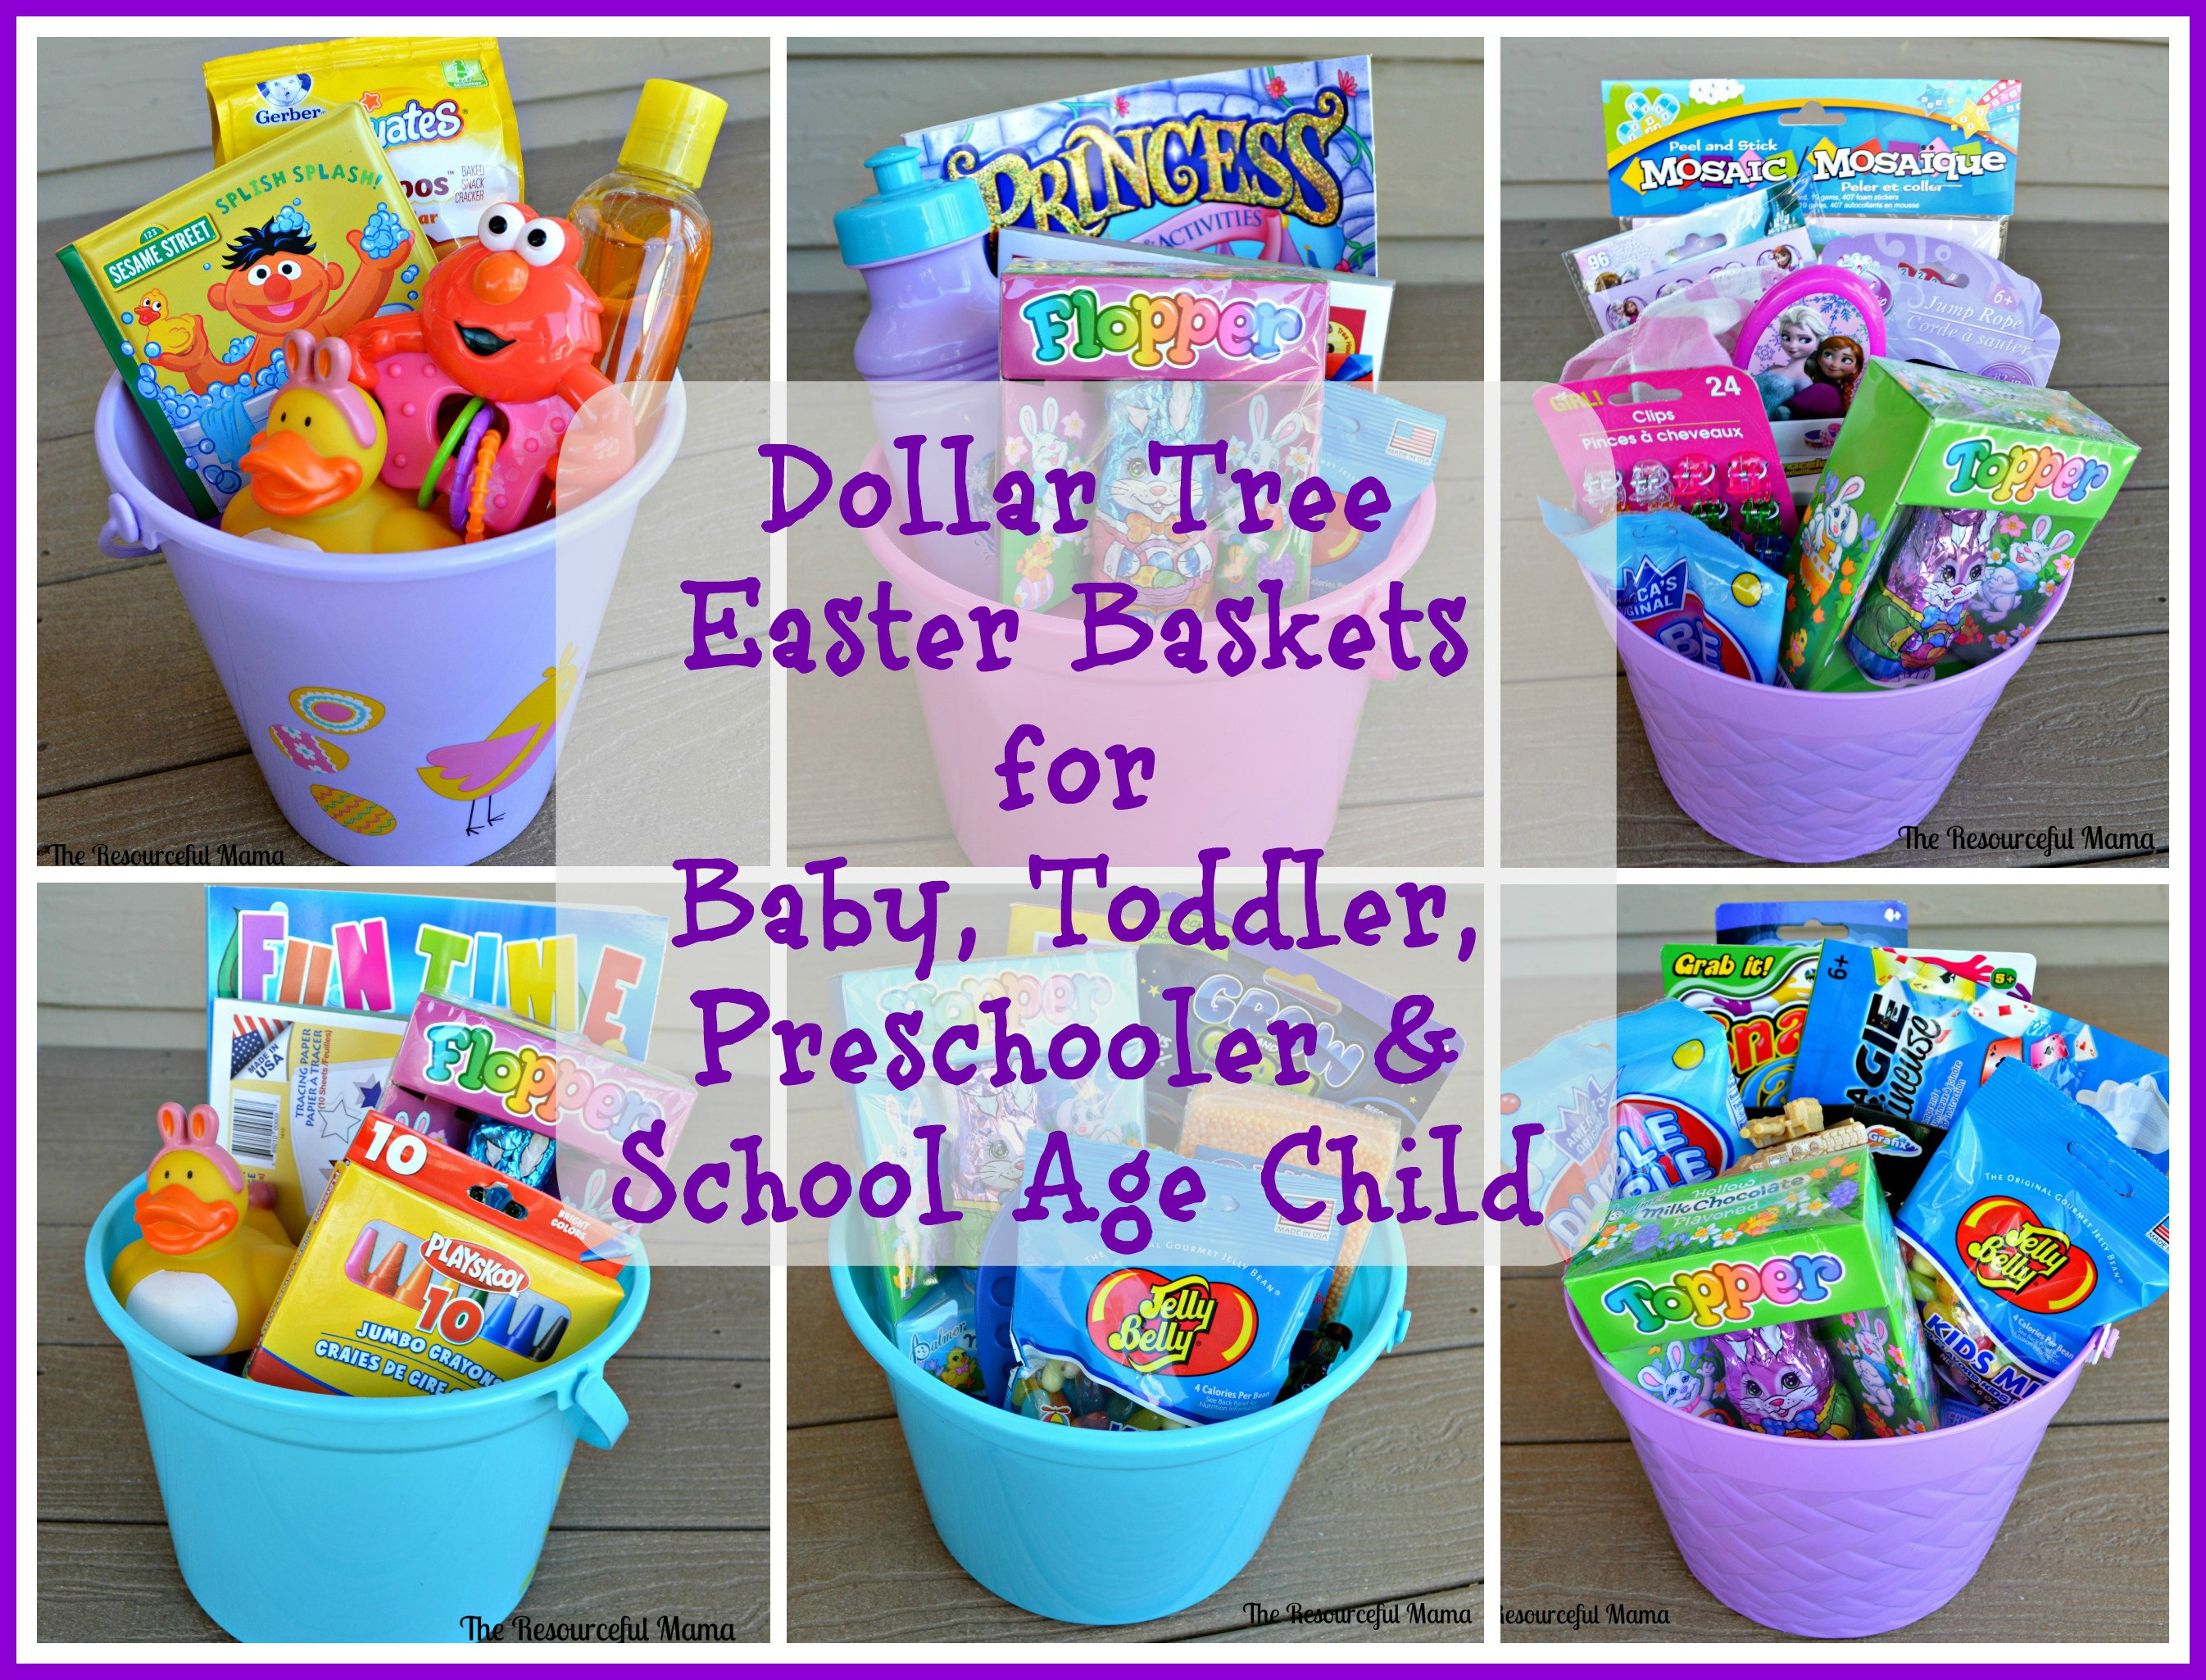 Easter Basket Gift Ideas
 Dollar Tree Easter Baskets The Resourceful Mama